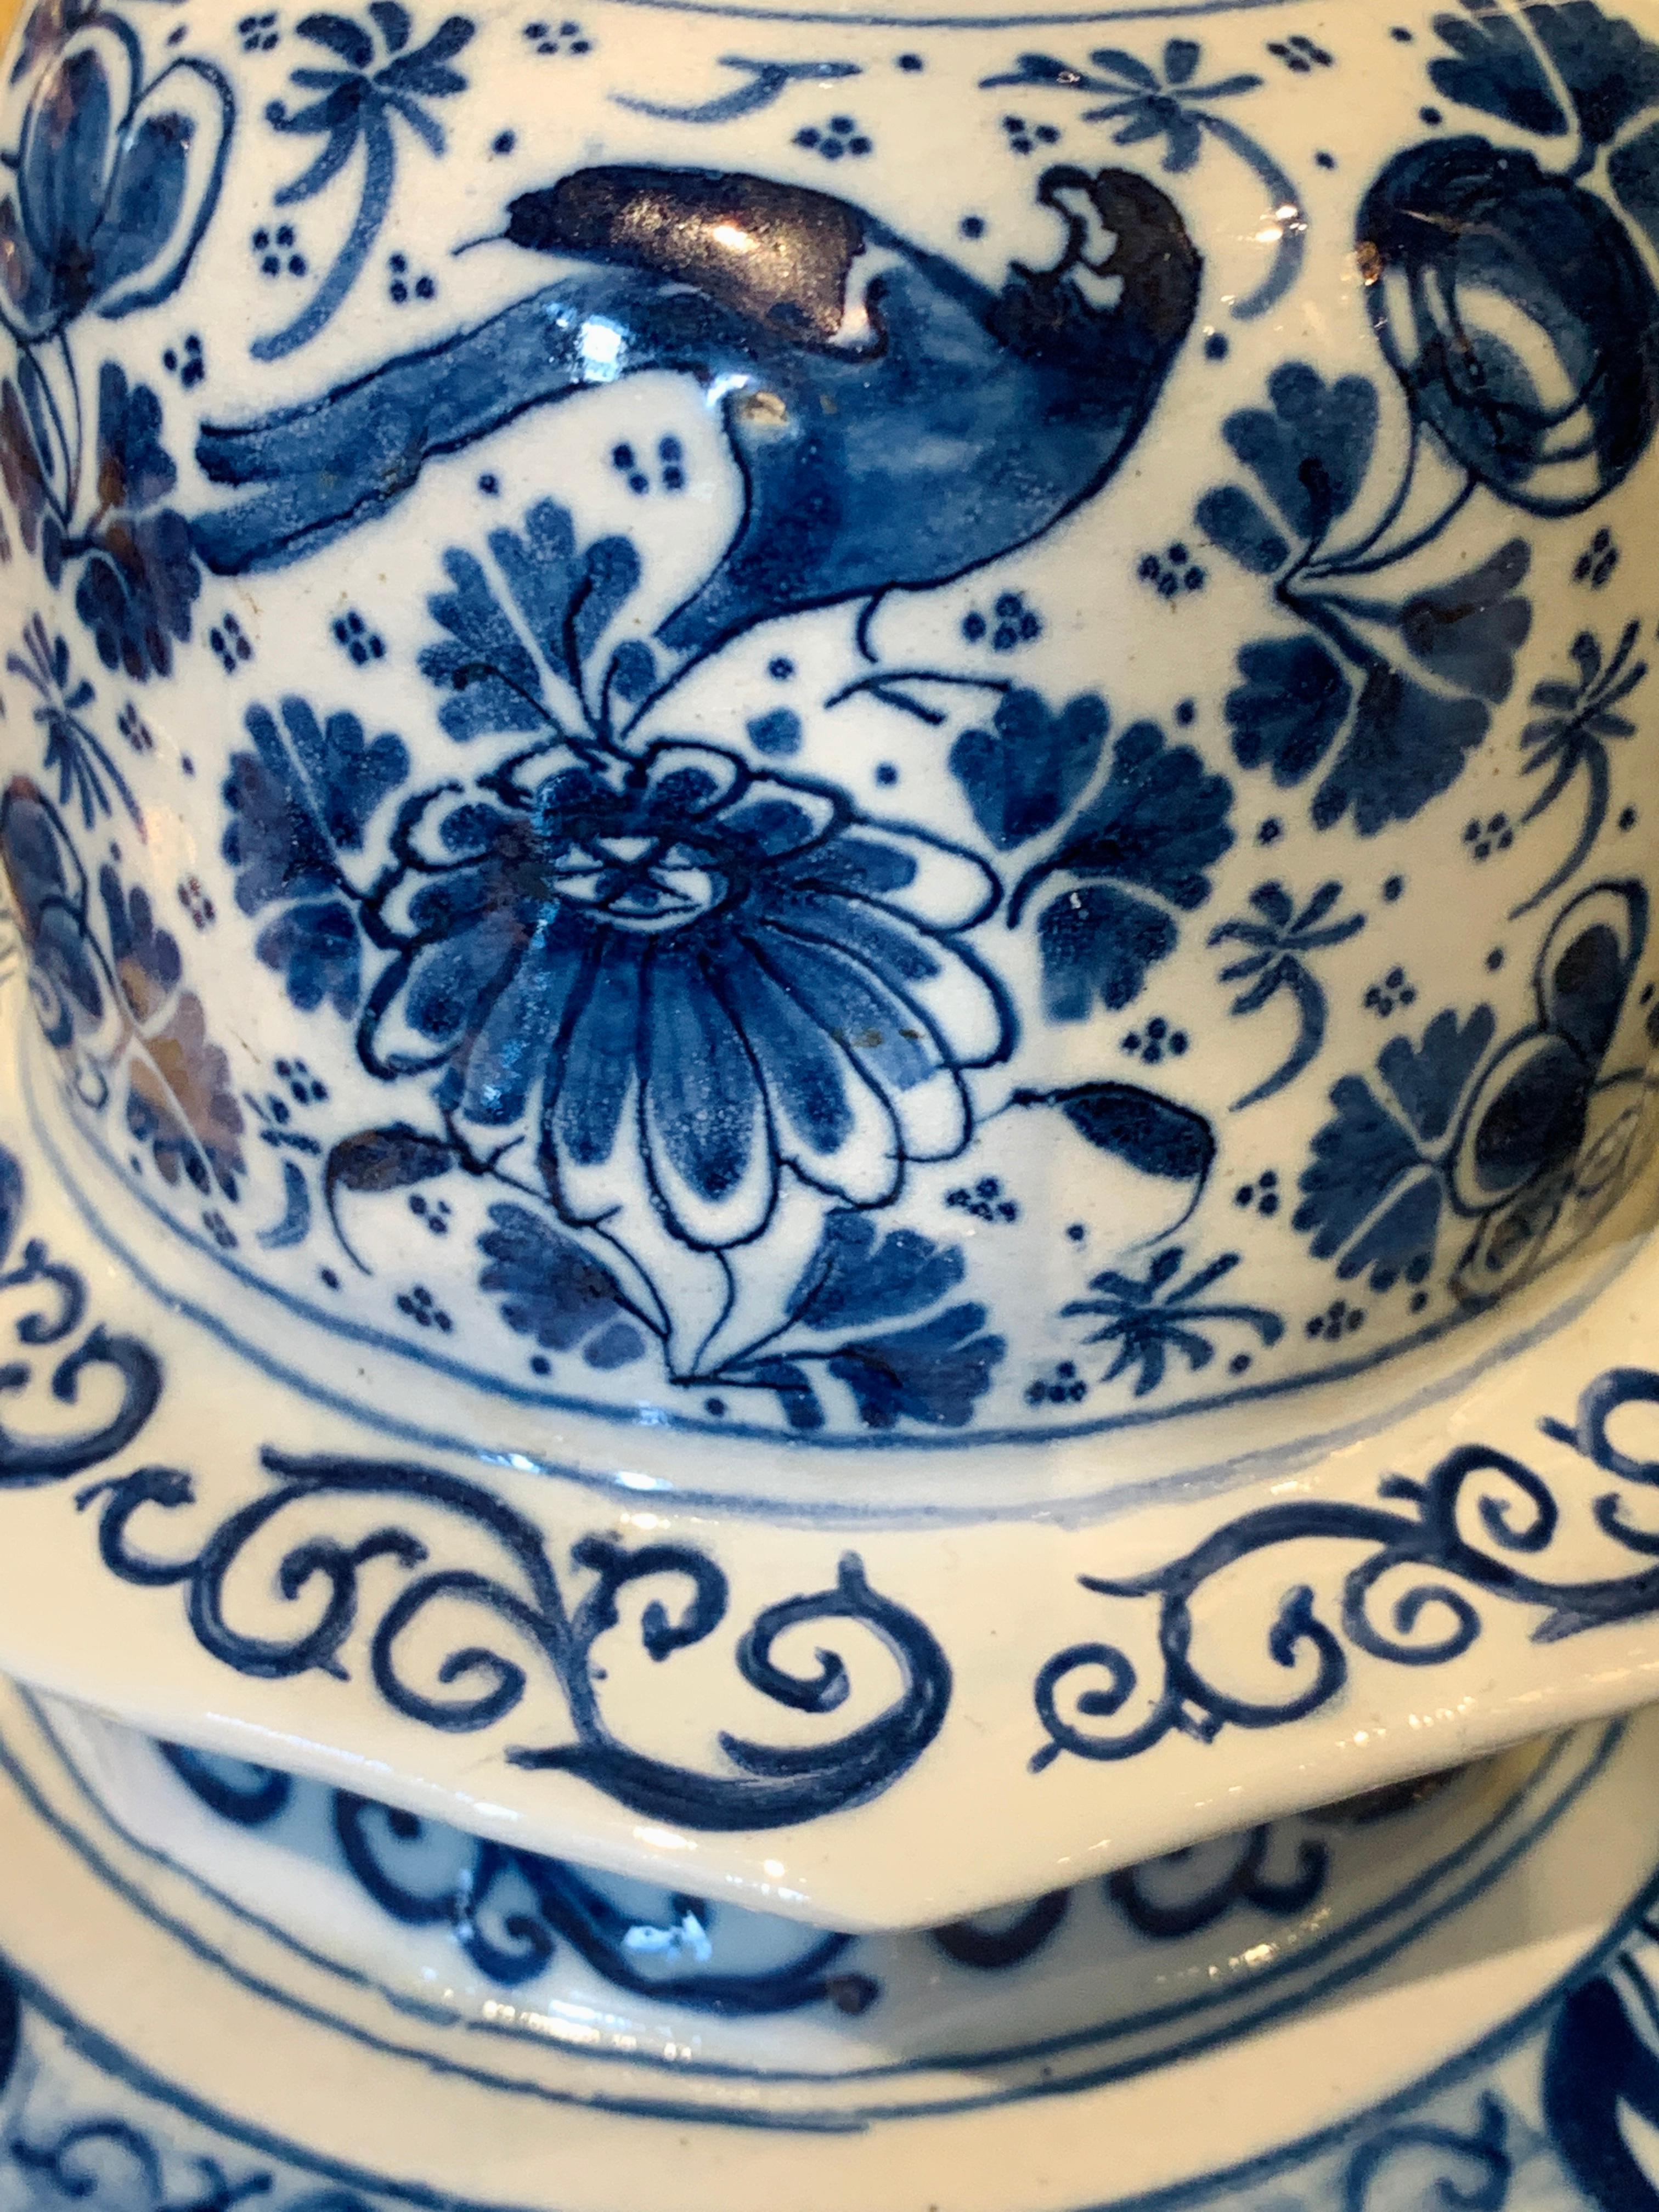 Romantic Antique Blue and White Delft Covered Jar Made Netherlands, 1700-1716